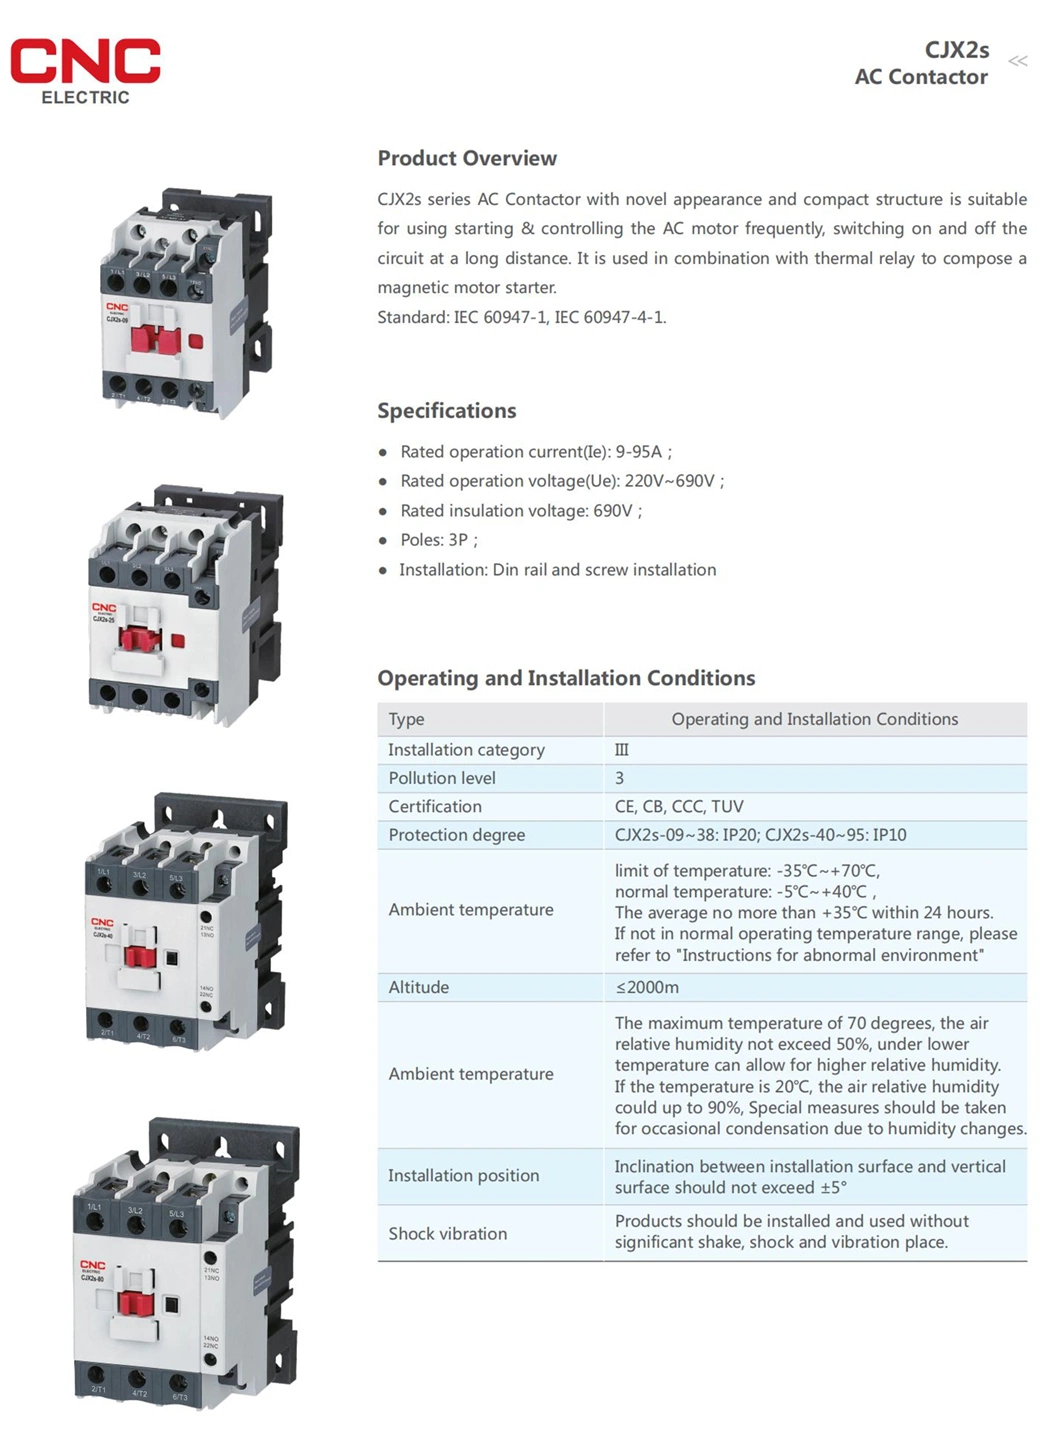 Customized AC Magnetic 25A Modular Electric Contactor